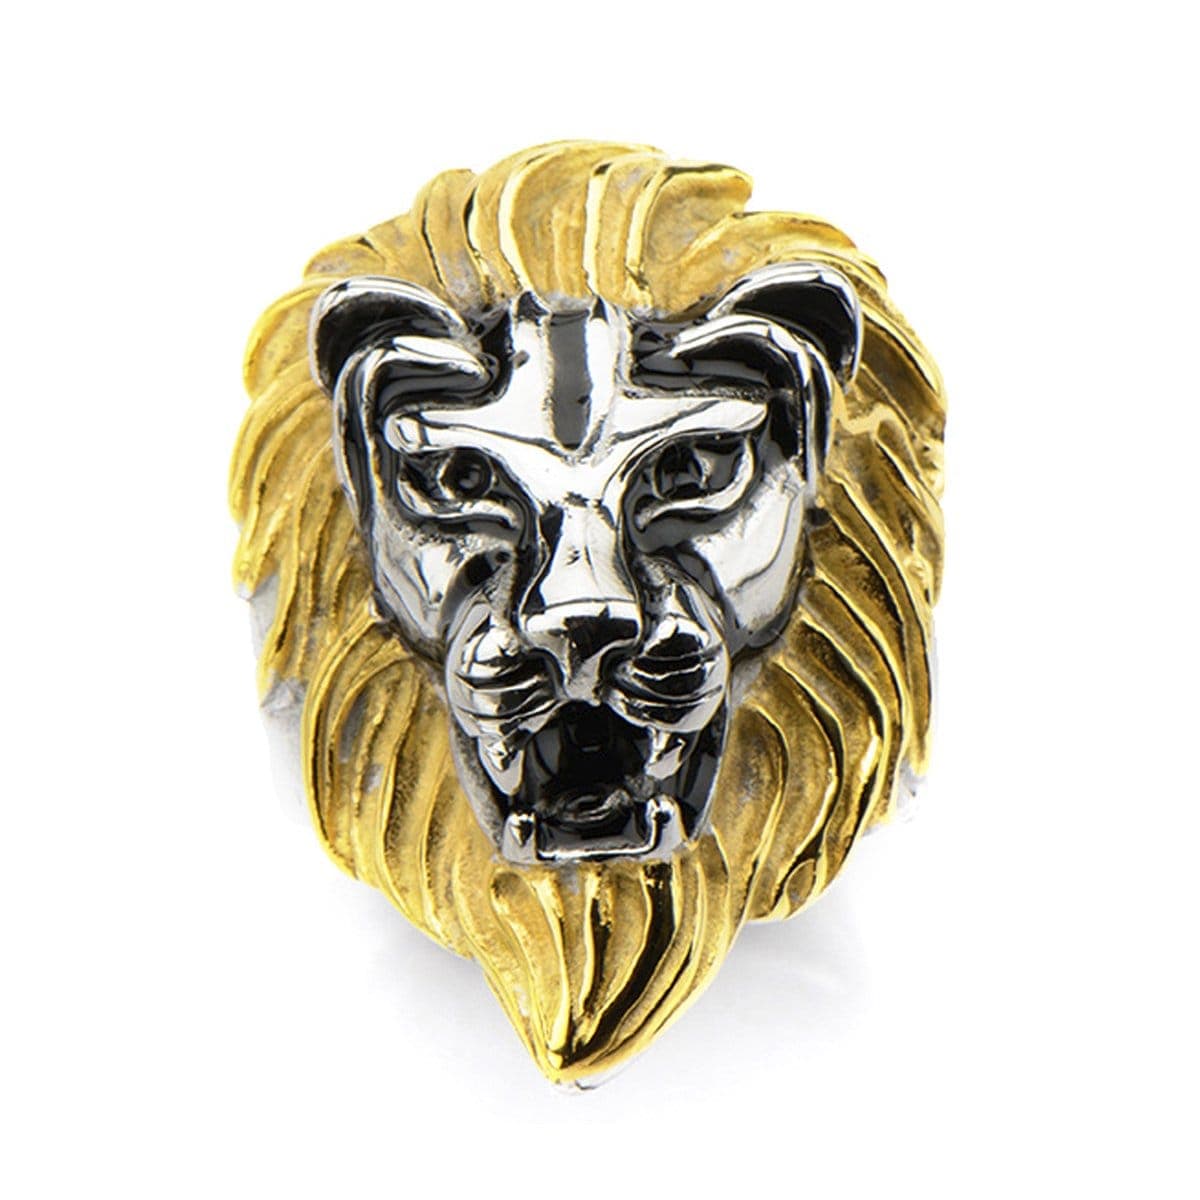 INOX JEWELRY Rings Golden Tone and Antiqued Silver Tone Stainless Steel Lion's Head Ring